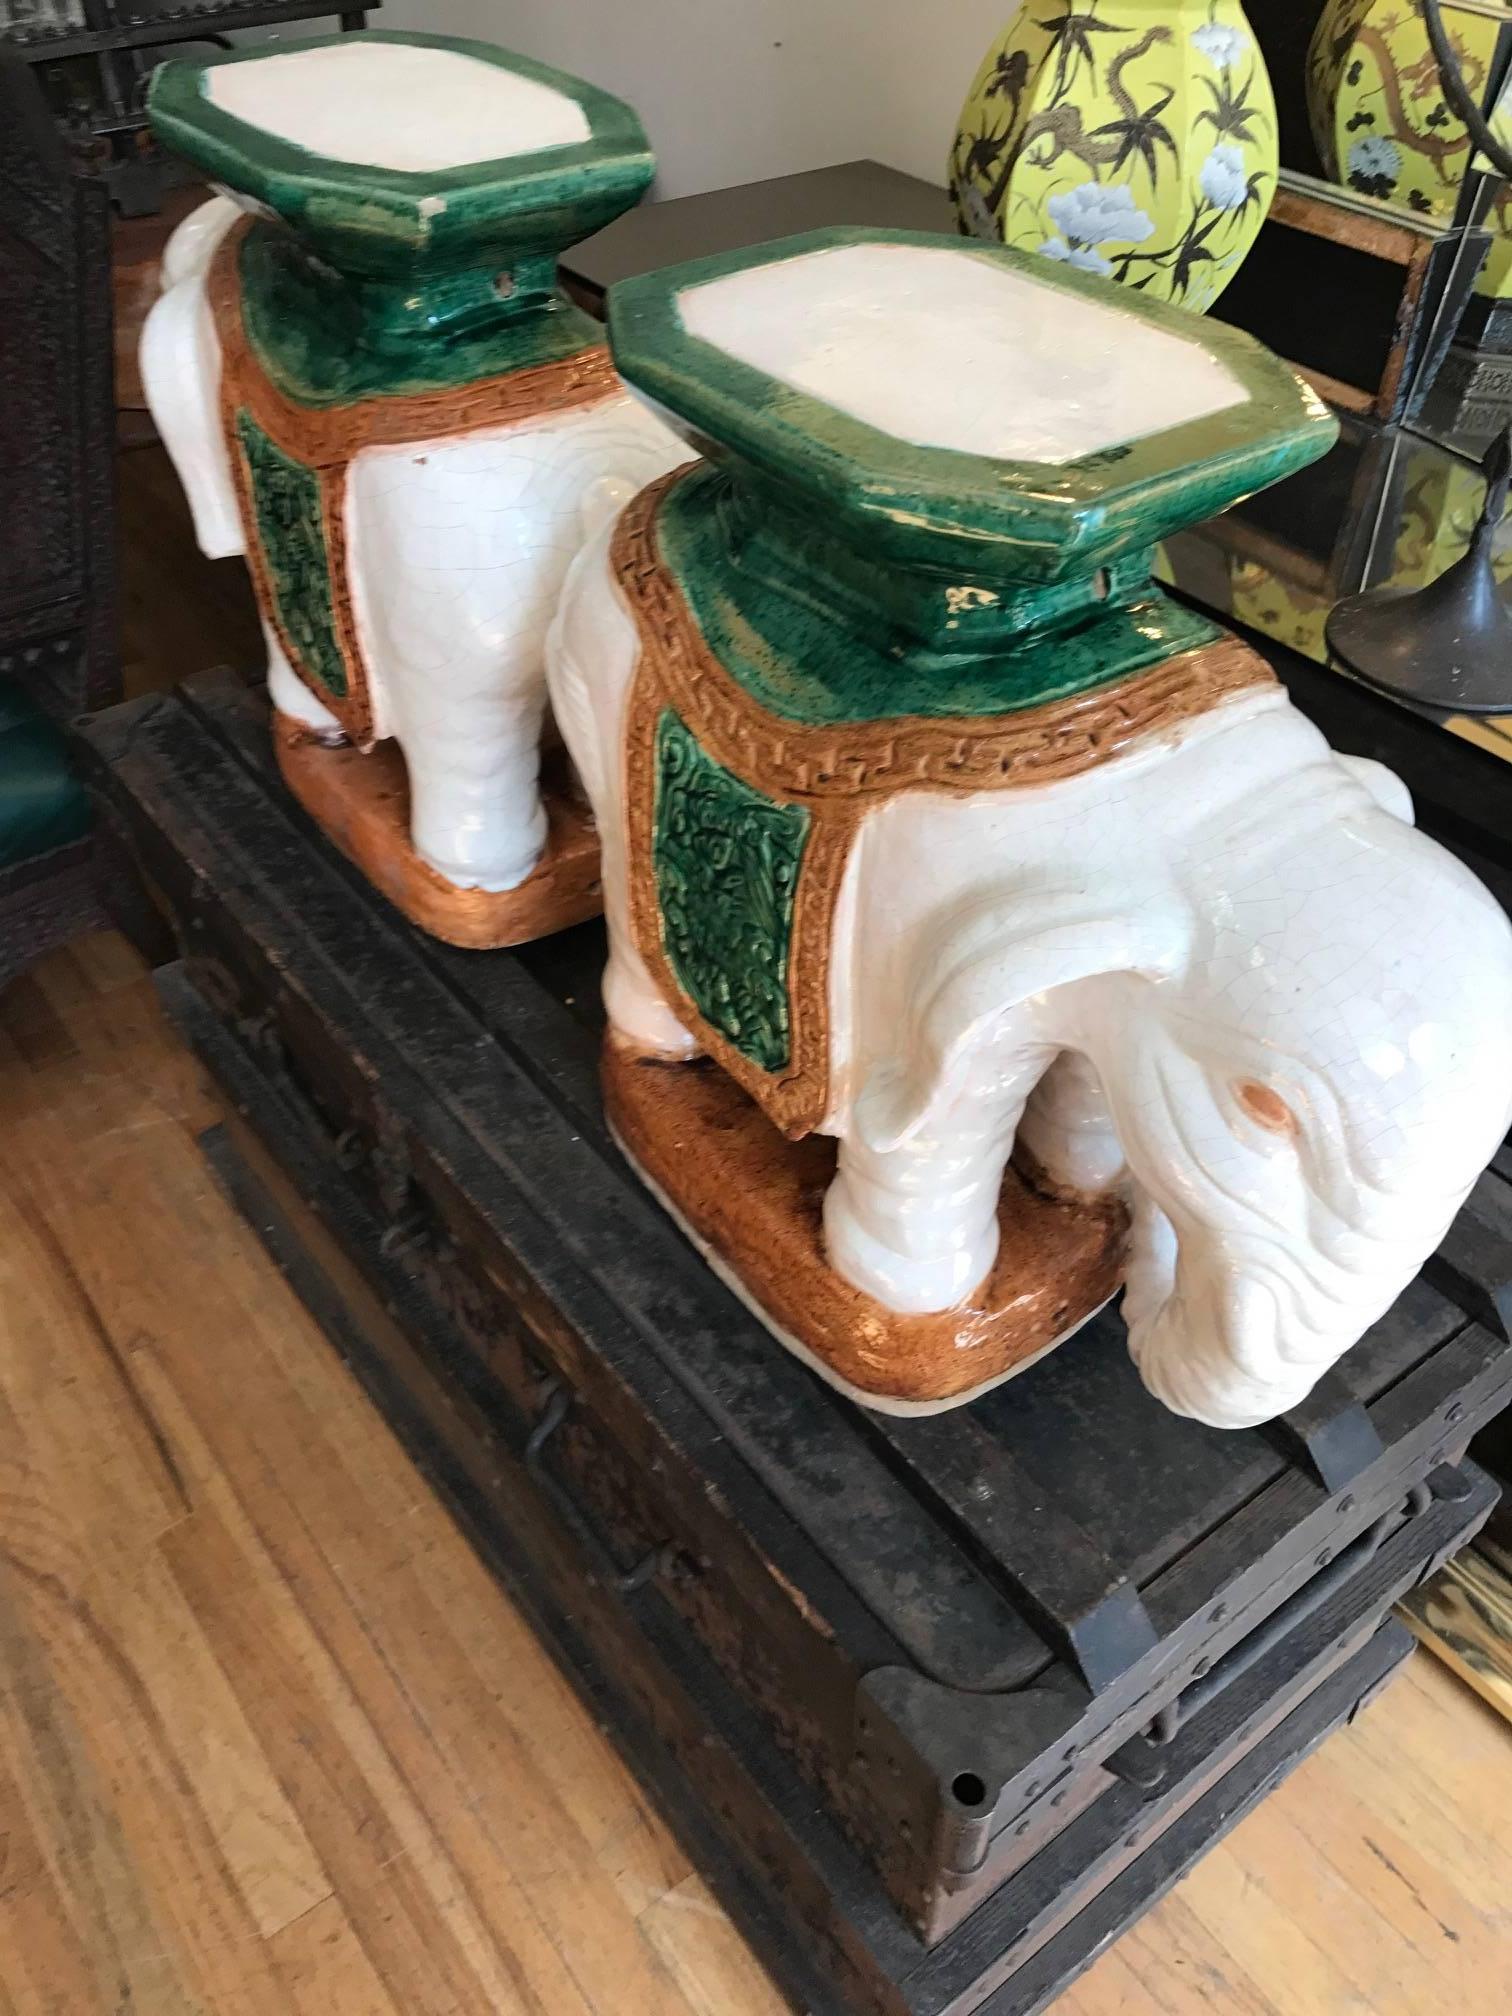 Pair of Italian ceramic elephant garden stools or drinks tables.
Great details in white and green crackle glaze great inside or outside as a side or end table.